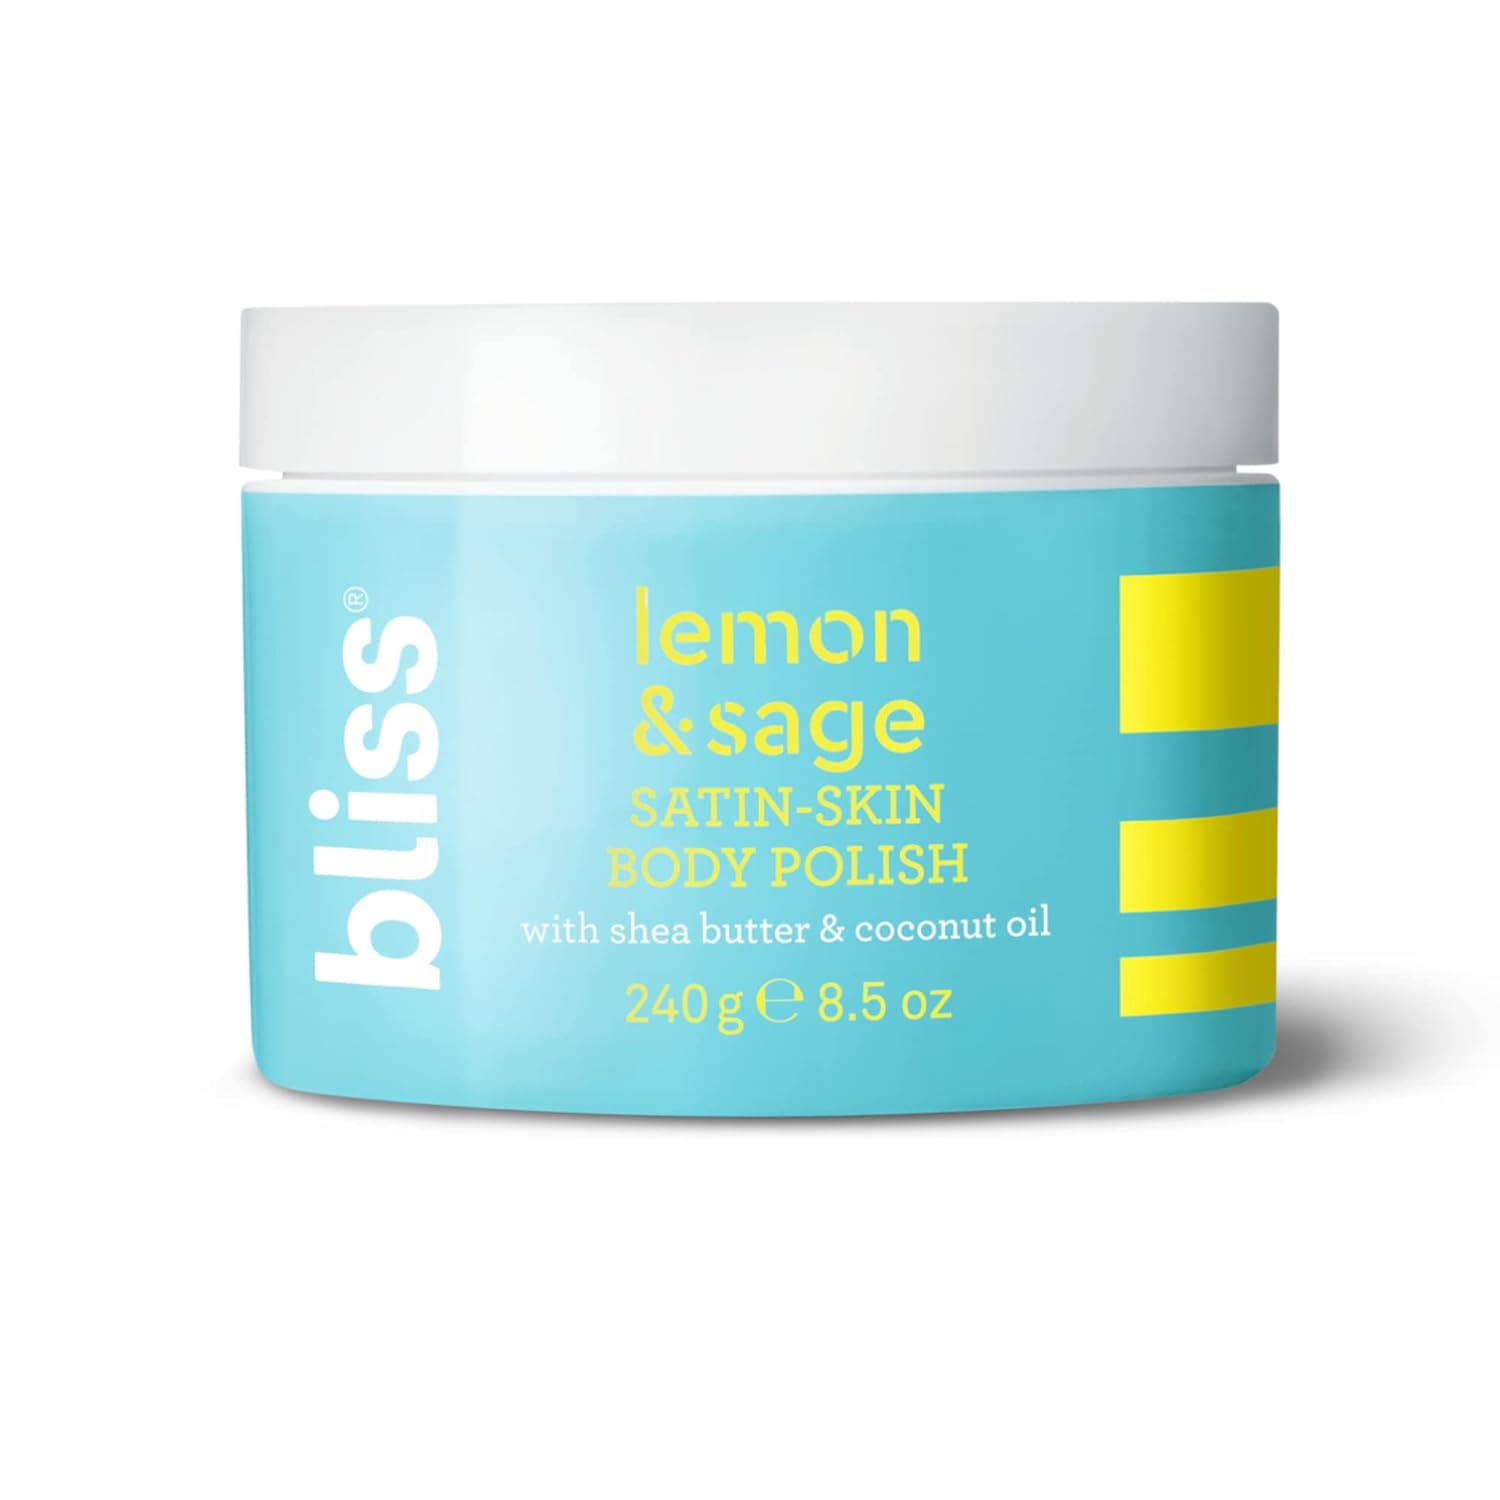 Bliss Satin-Skin Body Polish - Lemon and Sage - Body Scrub with Shea Butter and Coconut Oil - 8.5 Oz - Smoothing and Balancing Skincare - All Skin Types - Vegan & Cruelty-Free : Beauty & Personal Care